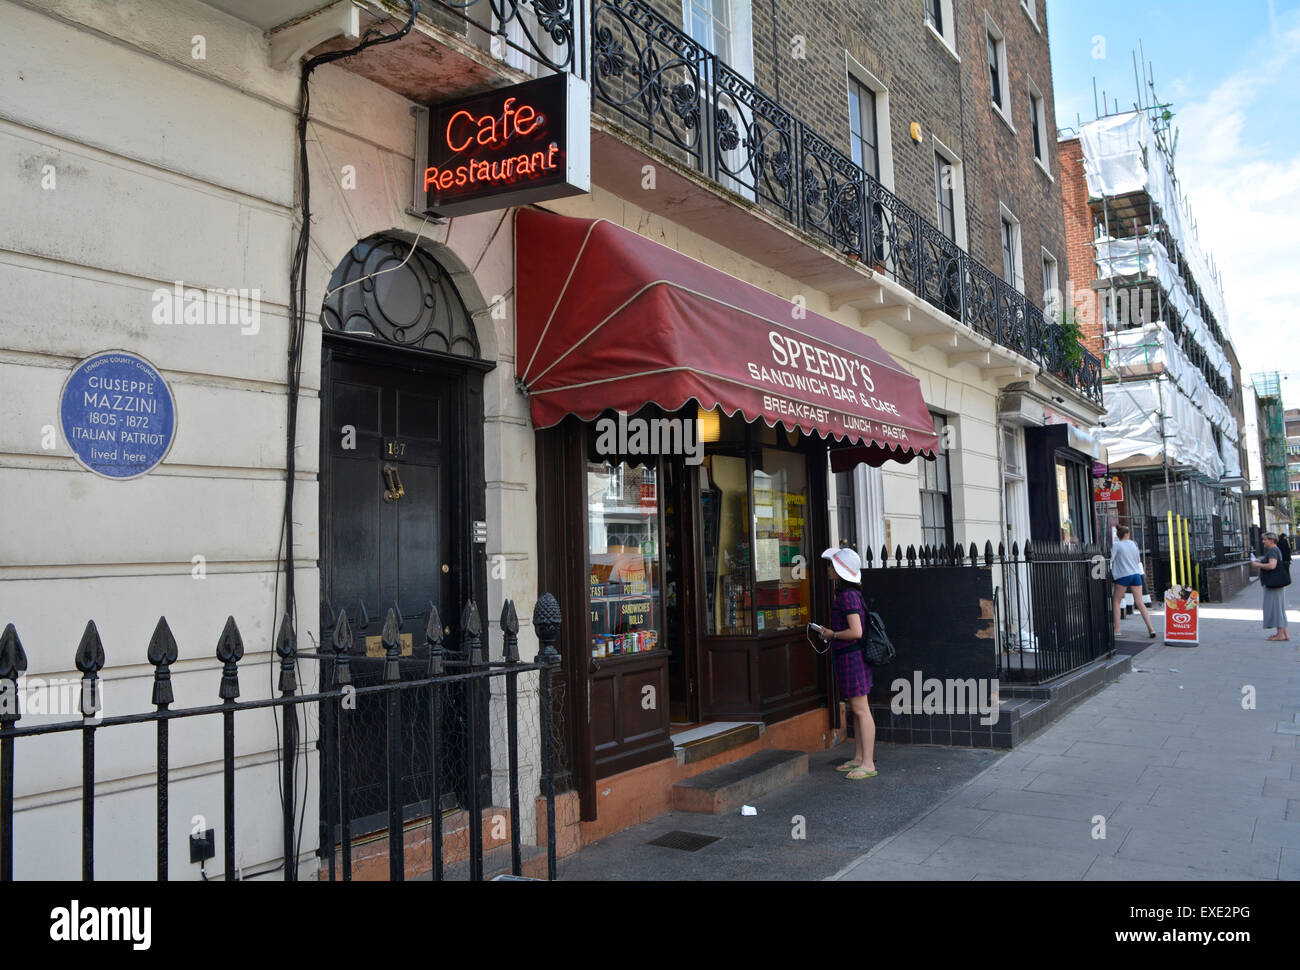 Speedy's Sandwich Bar and Cafe in Camden which recently featured in the BBC series Sherlock. Stock Photo